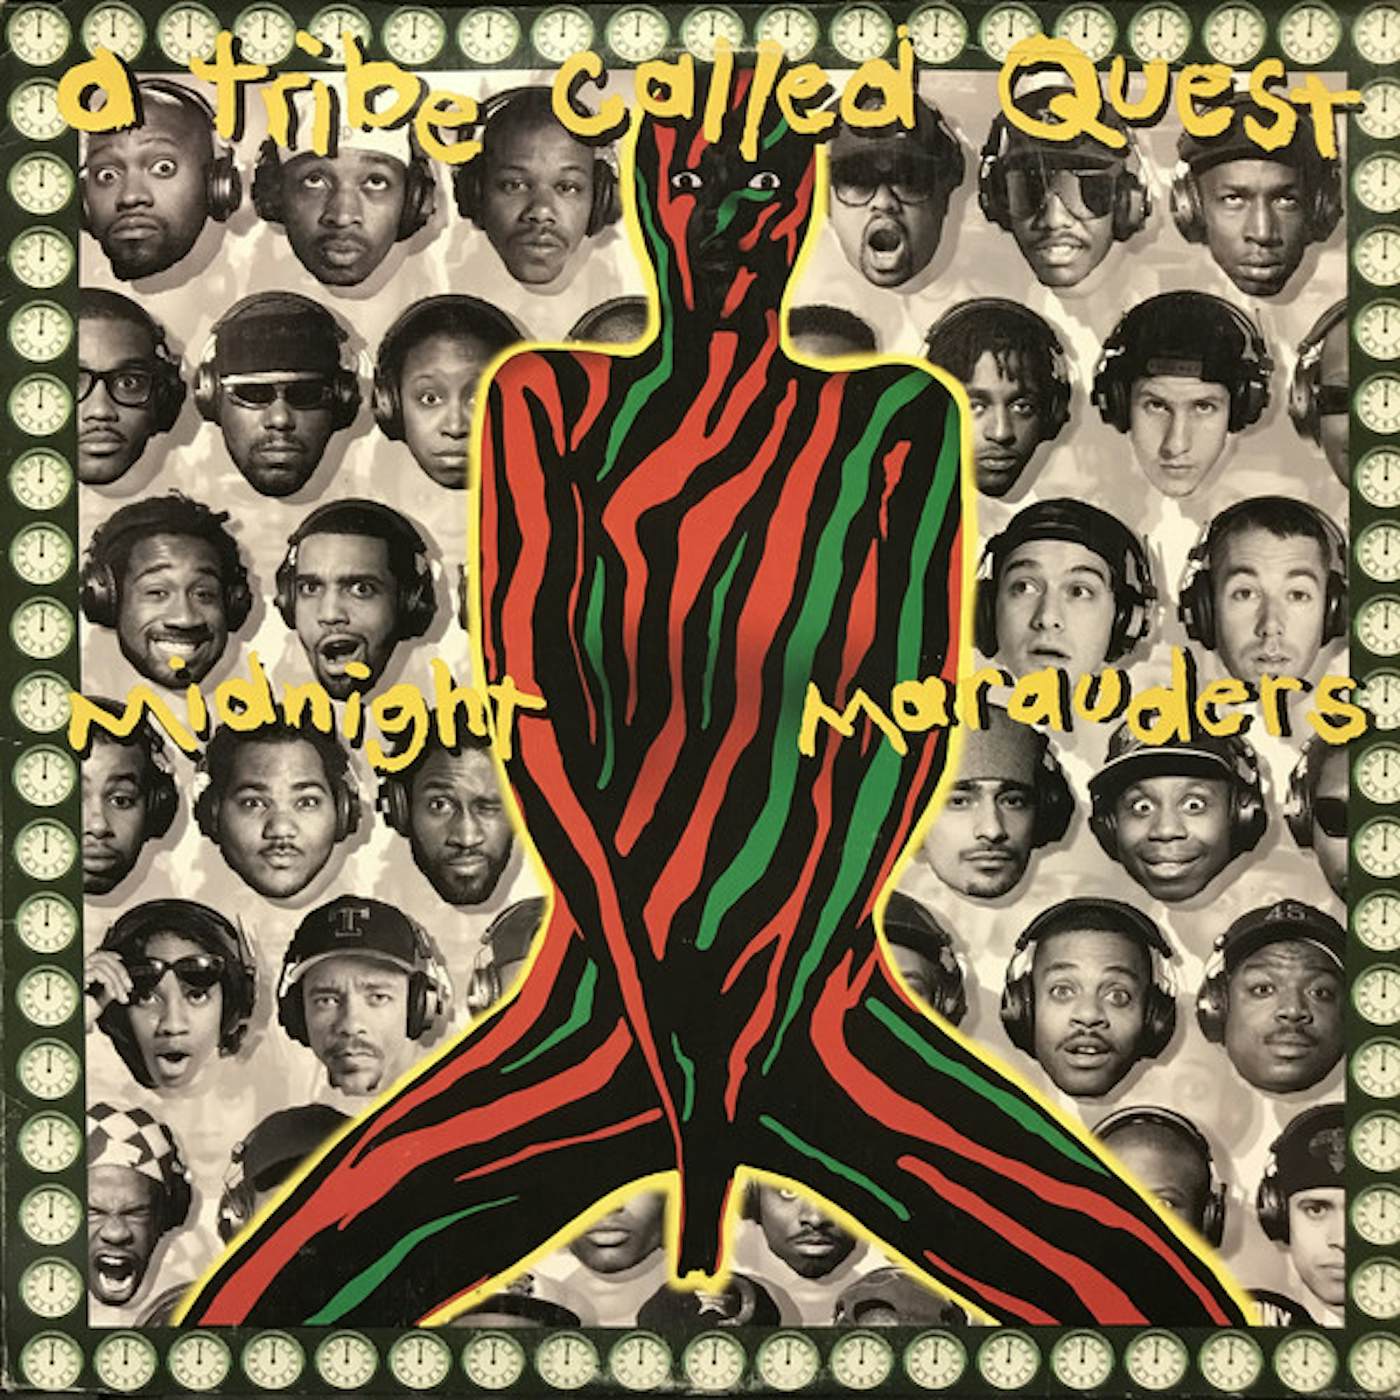 A Tribe Called Quest MIDNIGHT MARAUDERS CD